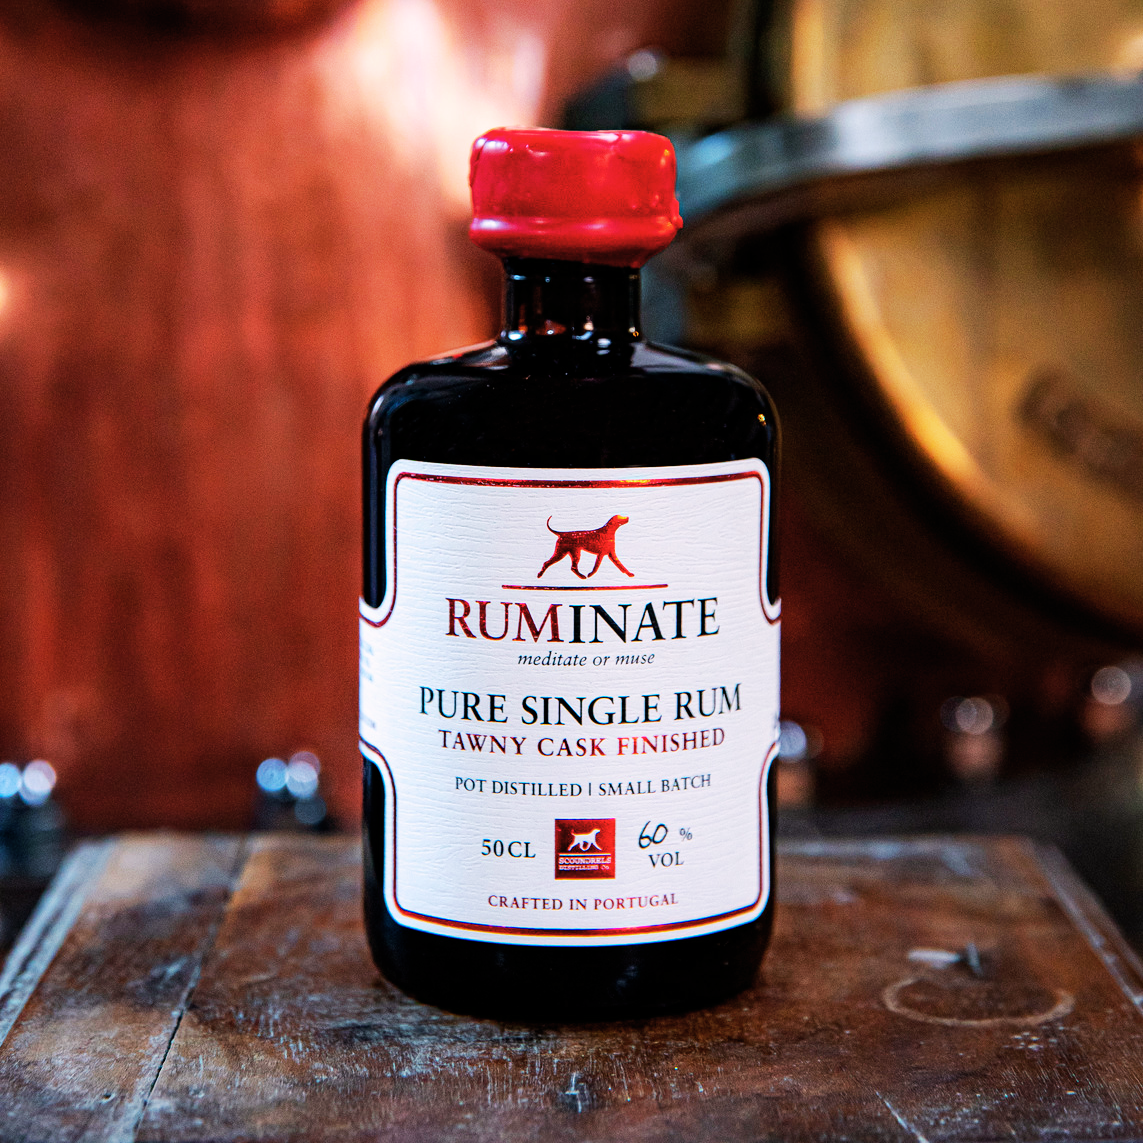 Bottle of Ruminate Pure Single Rum in front of a wooden cask